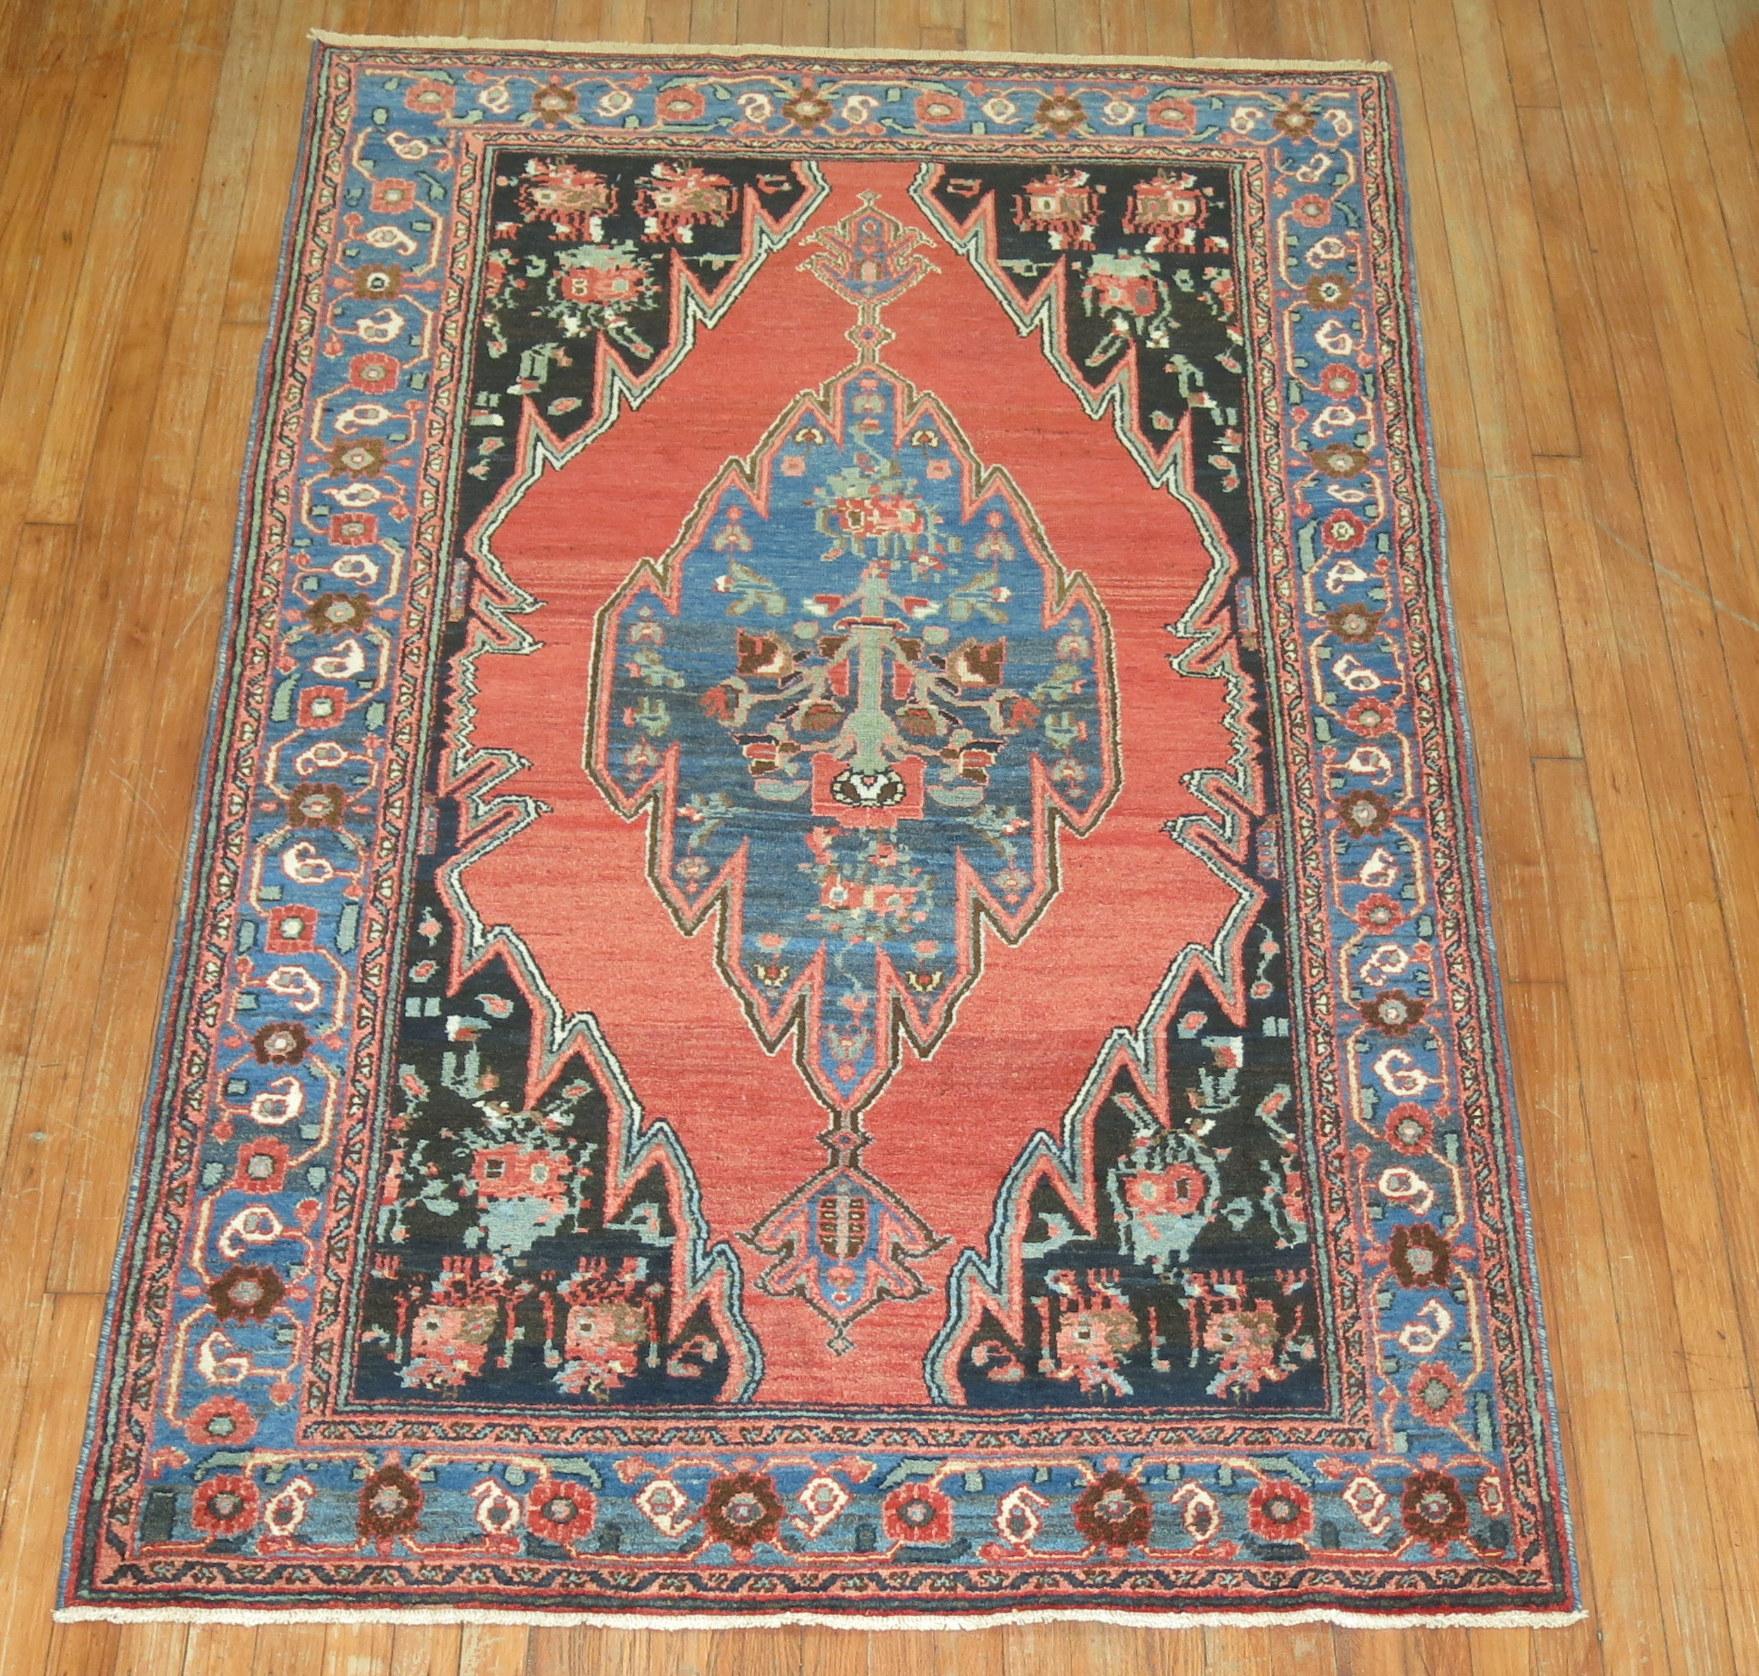 A large accent-size Persian Mazlagan Rug from the middle of the 20th century

4'4'' x 6'8''